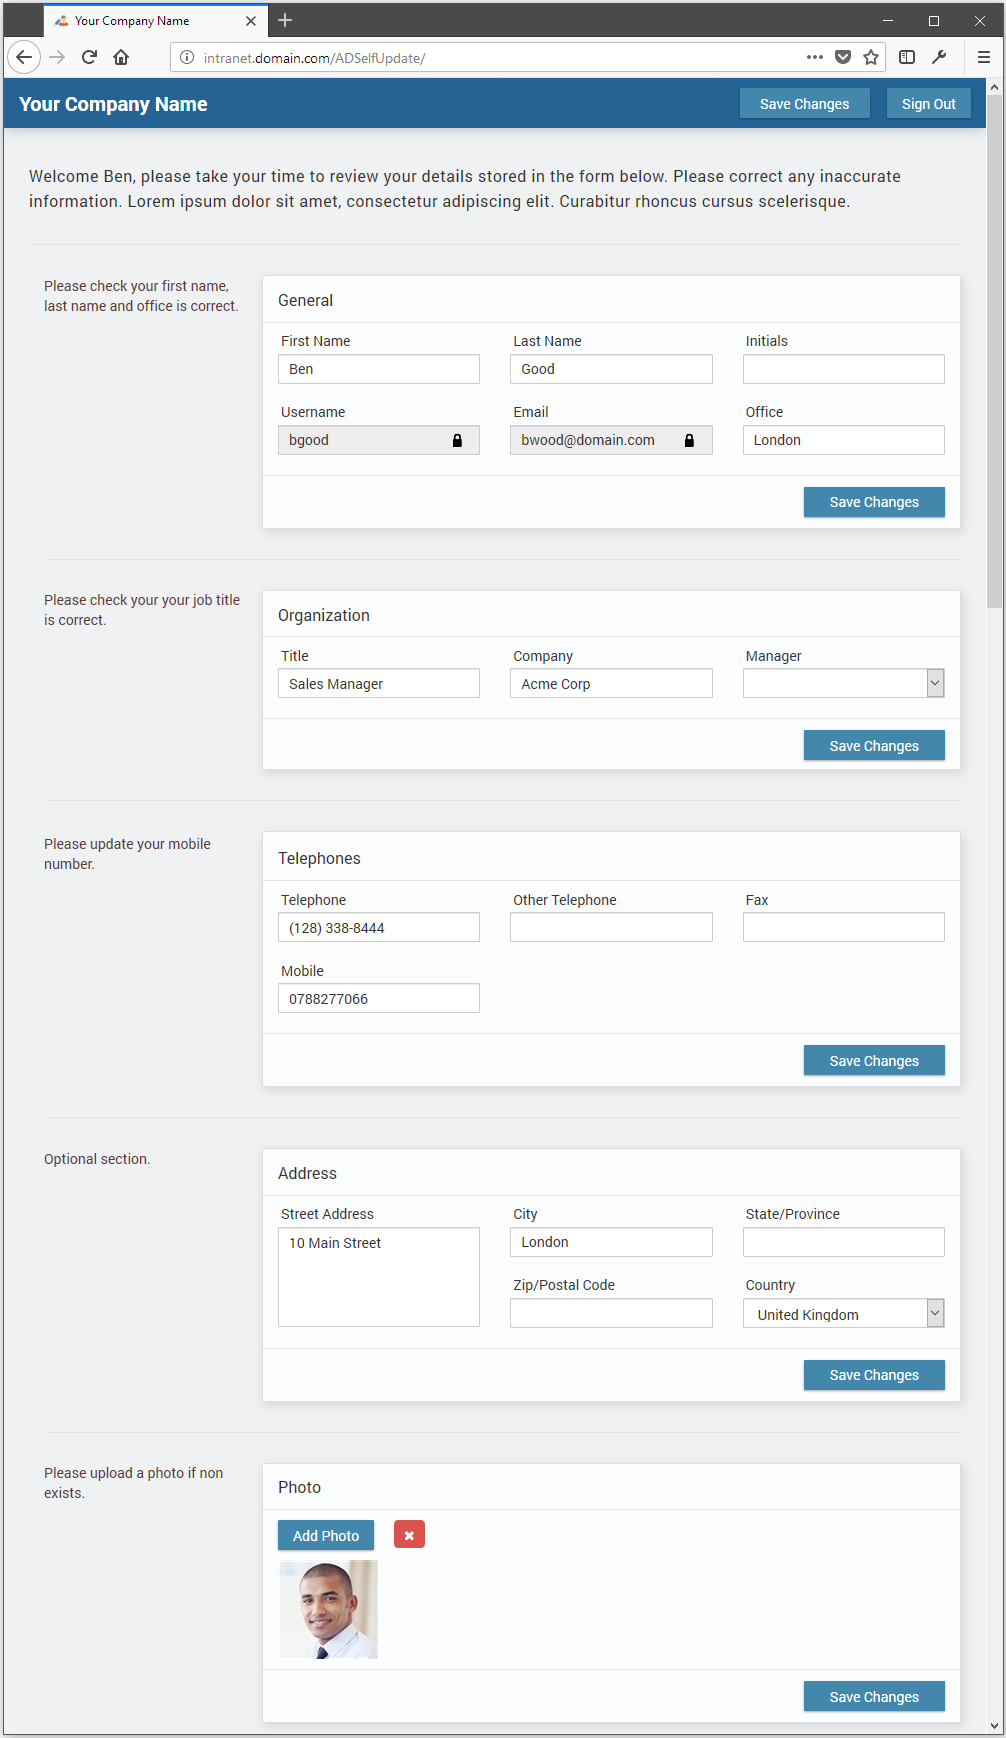 The main self service form your users will see